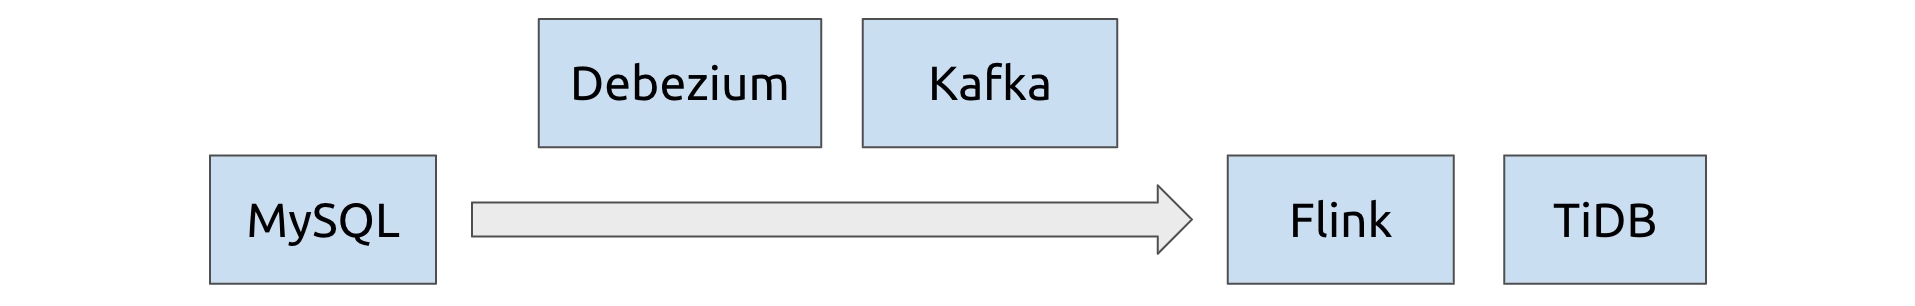 An architecture incorporating Kafka, with MySQL as data source